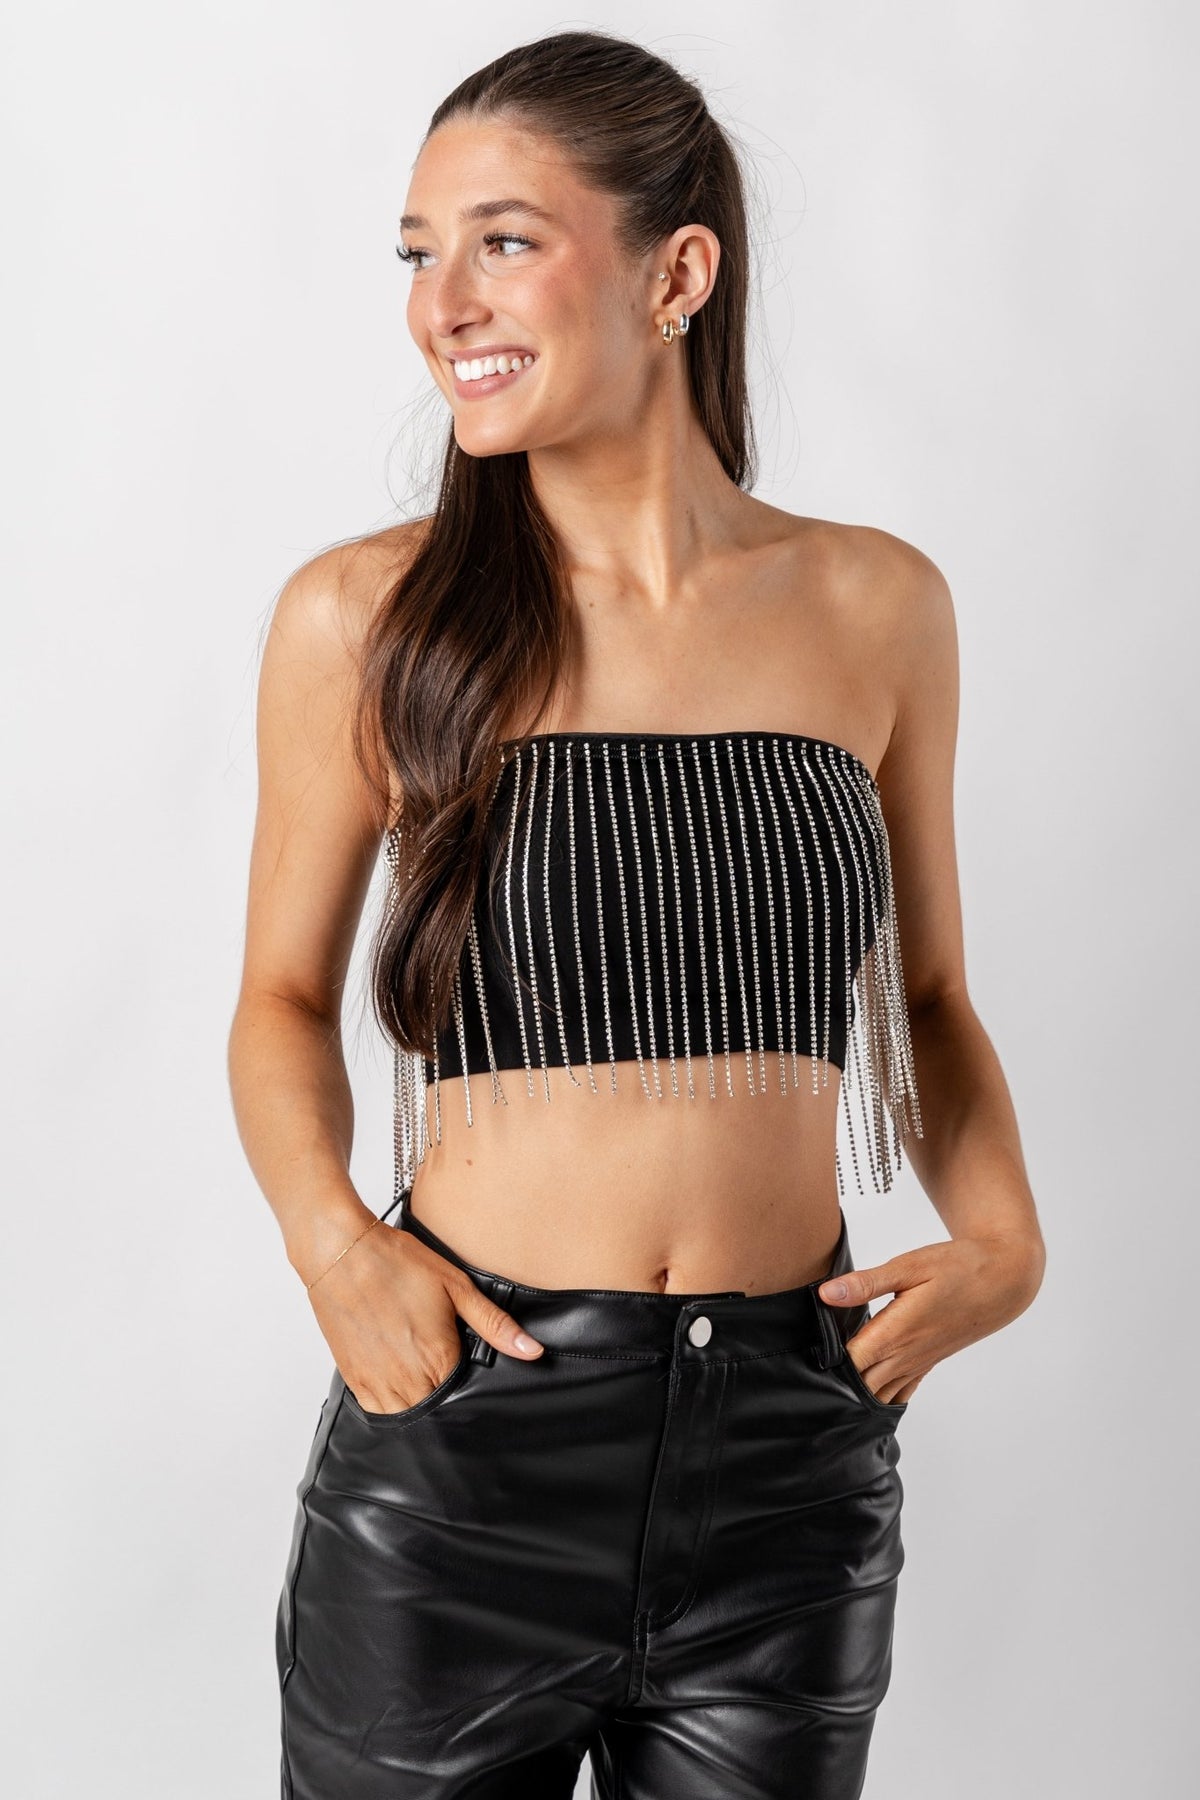 Rhinestone fringe strapless top black - Trendy New Year's Eve Outfits at Lush Fashion Lounge Boutique in Oklahoma City